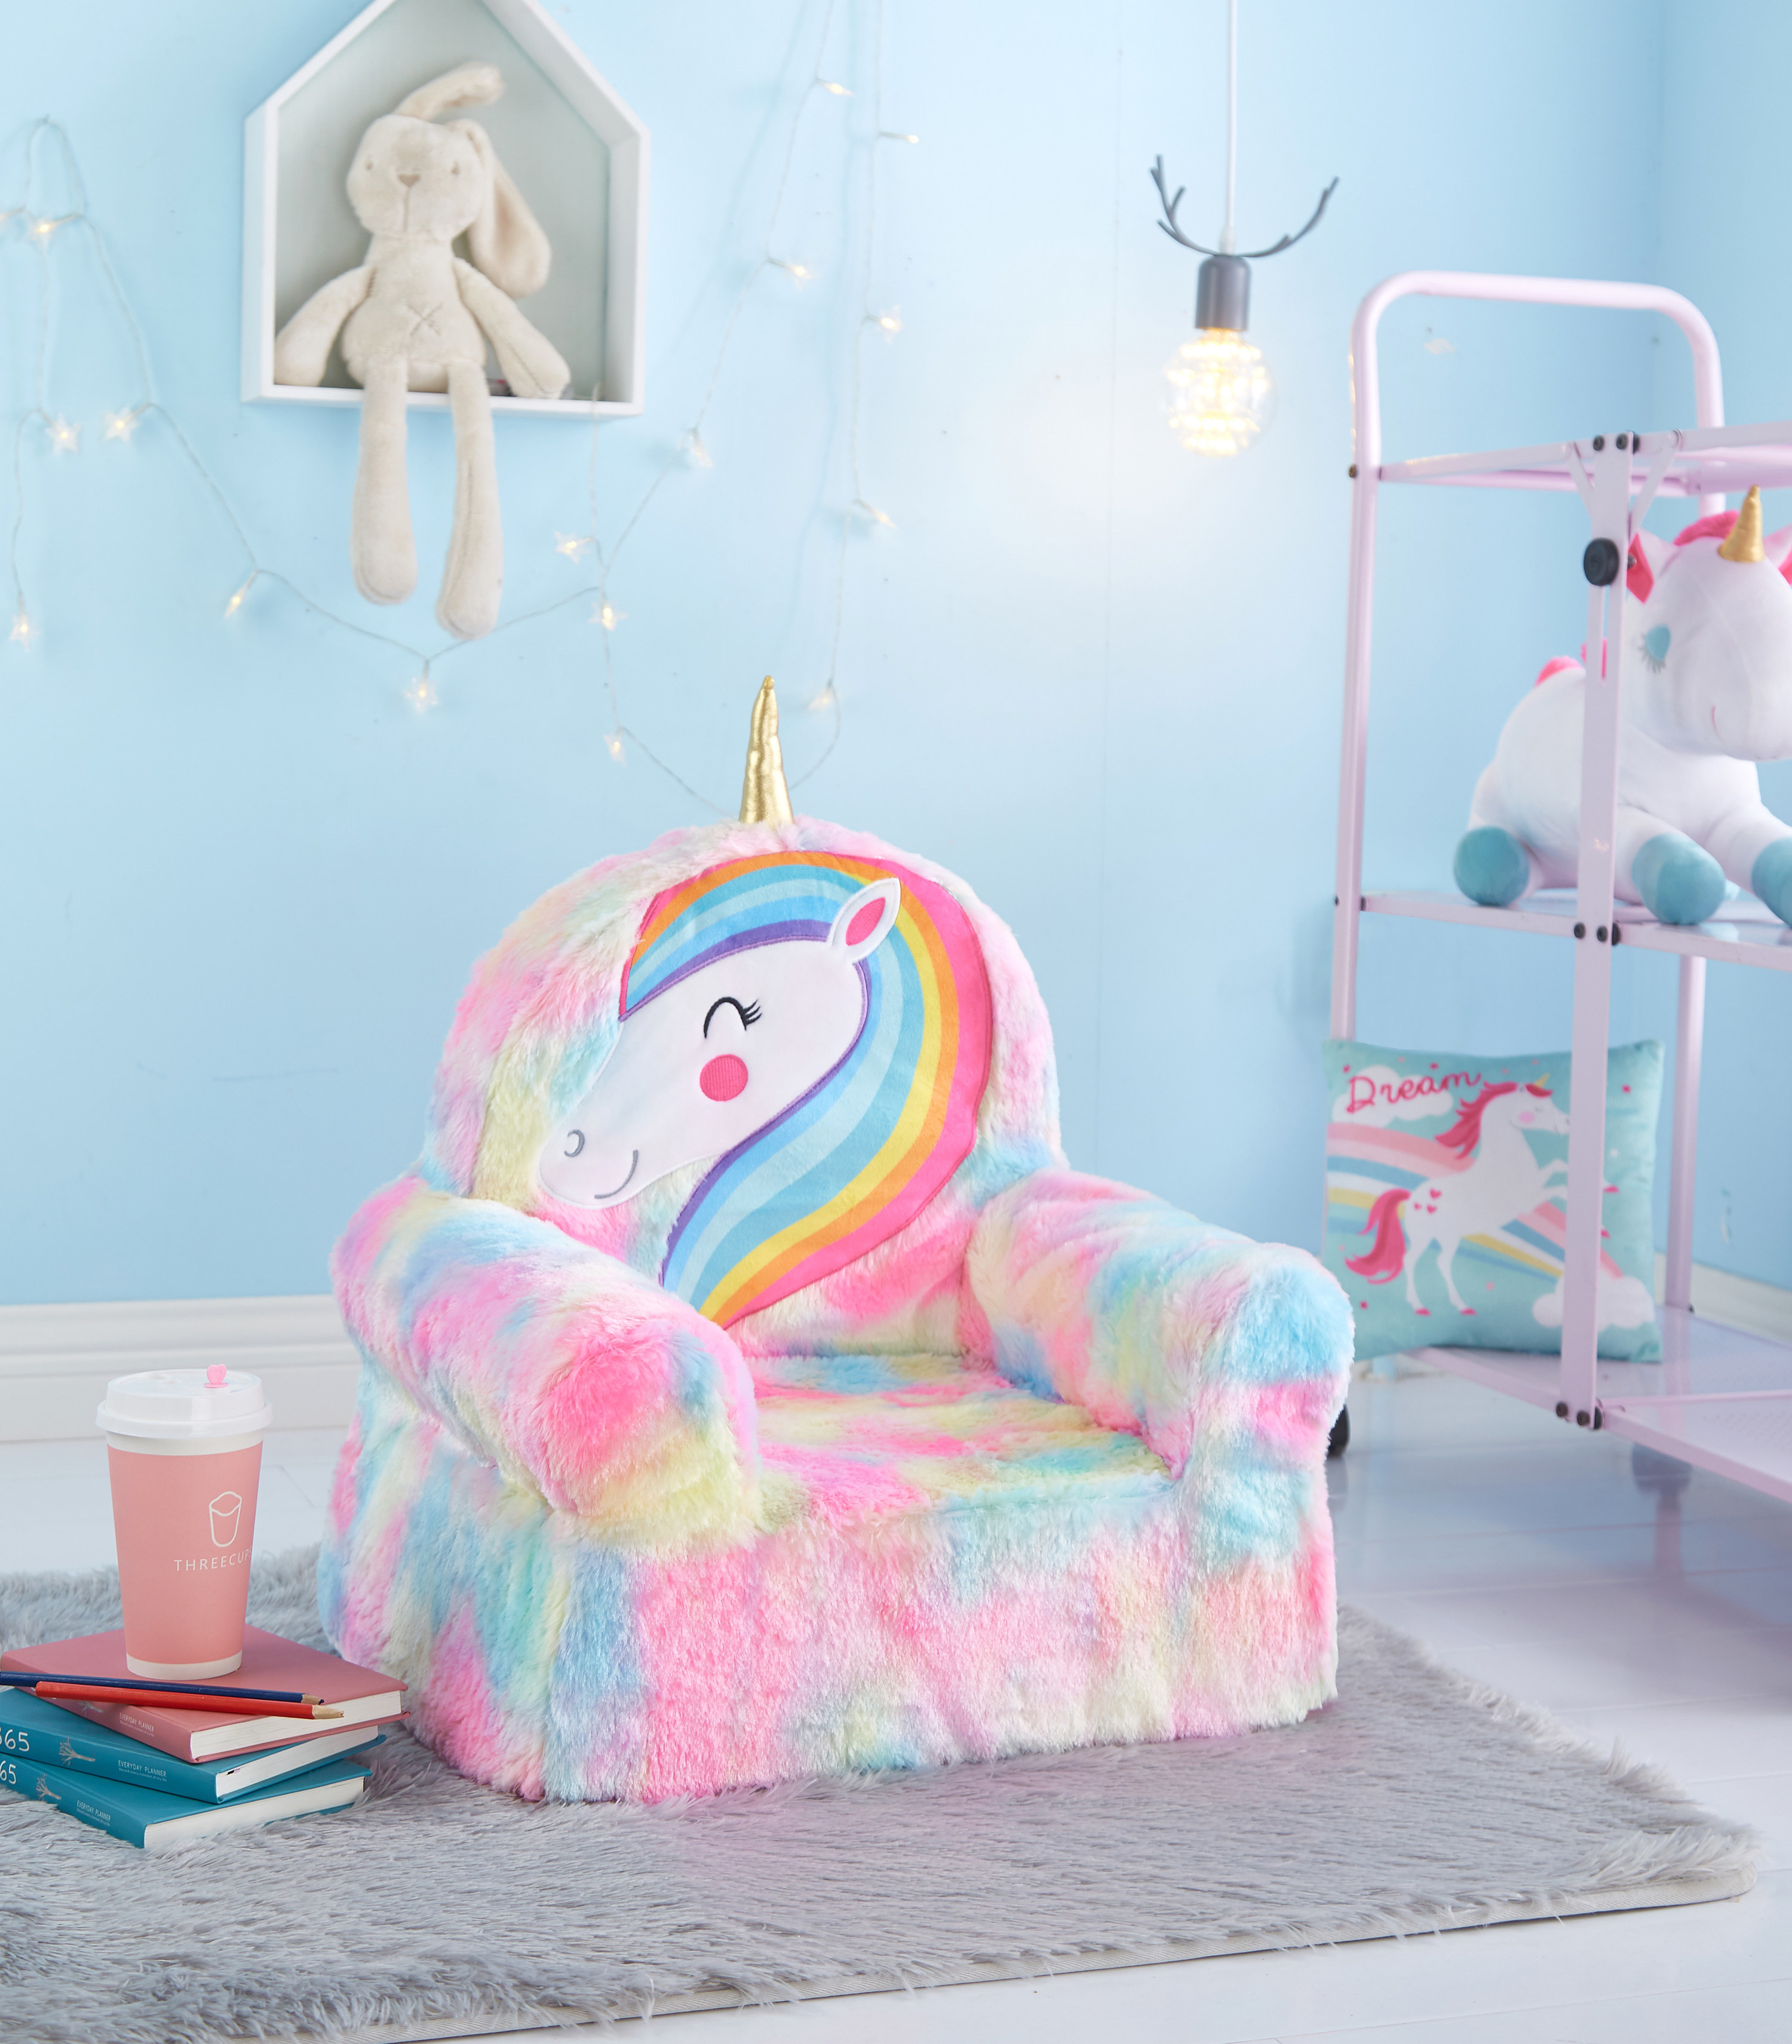 A fuzzy rainbow unicorn chair in a brightly colored room